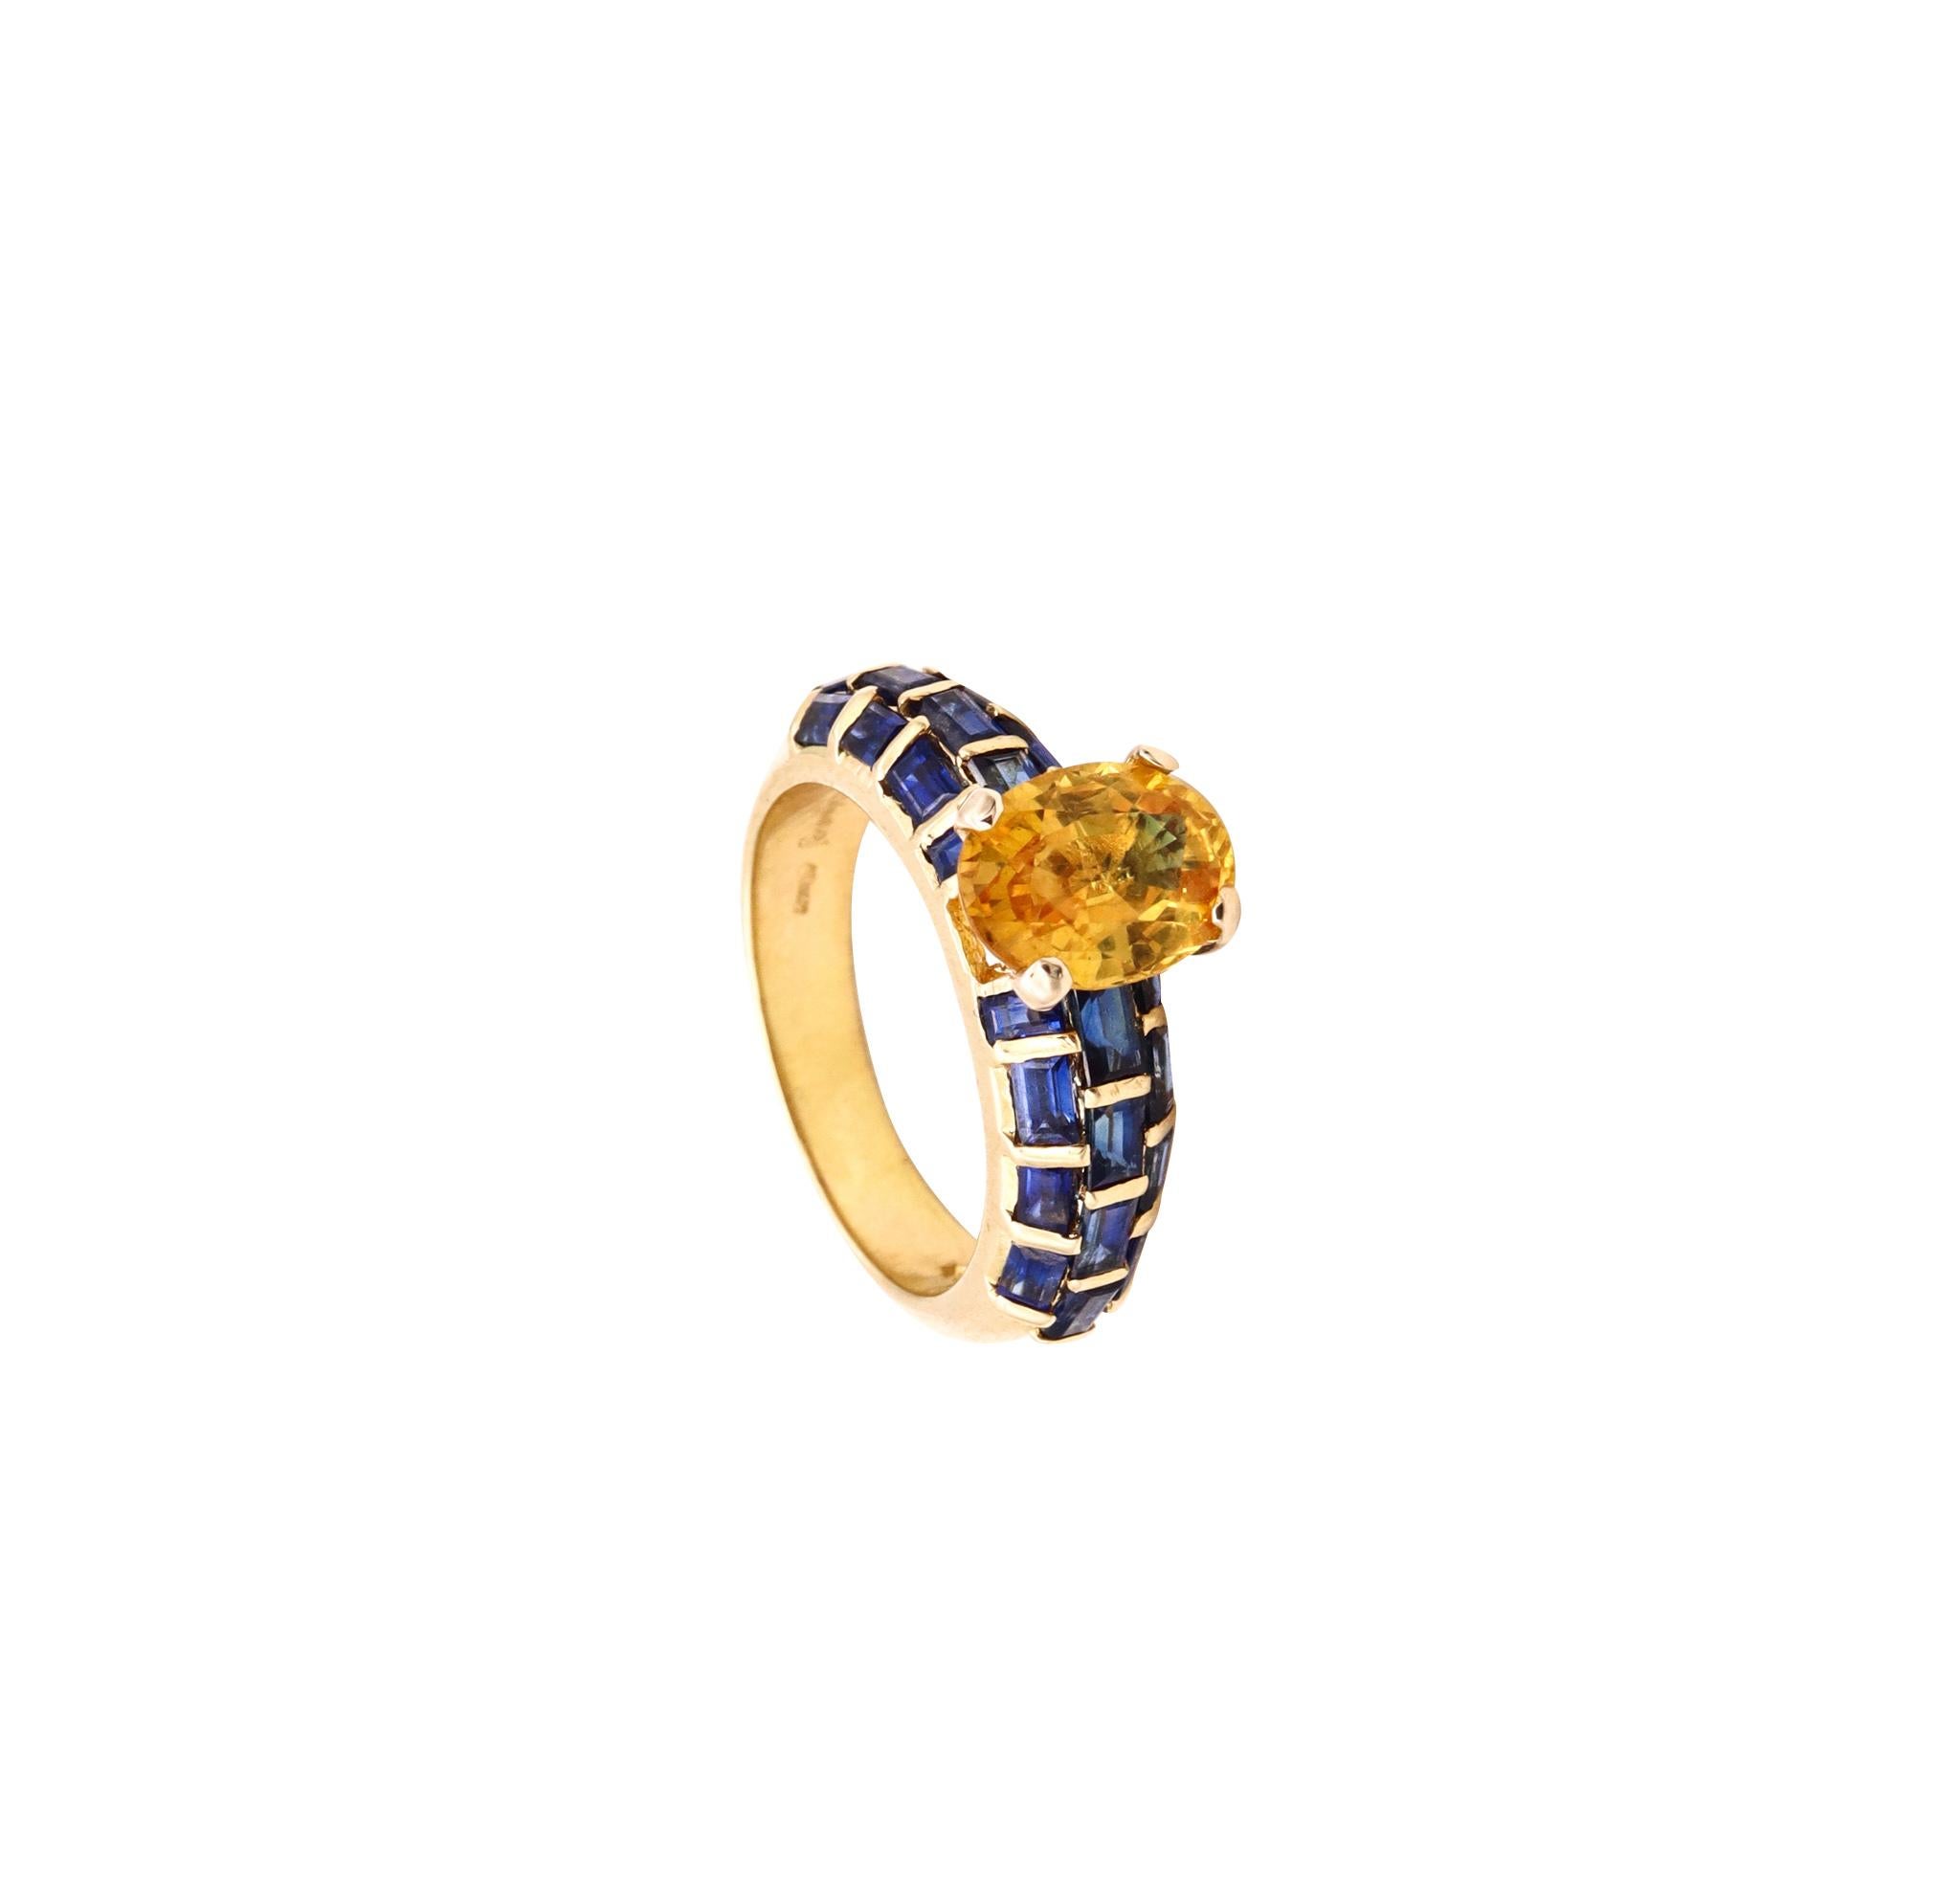 Sabbadini Milano Jeweled Ring 18kt Gold with 4.49 Cts Blue and Yellow Sapphires 5